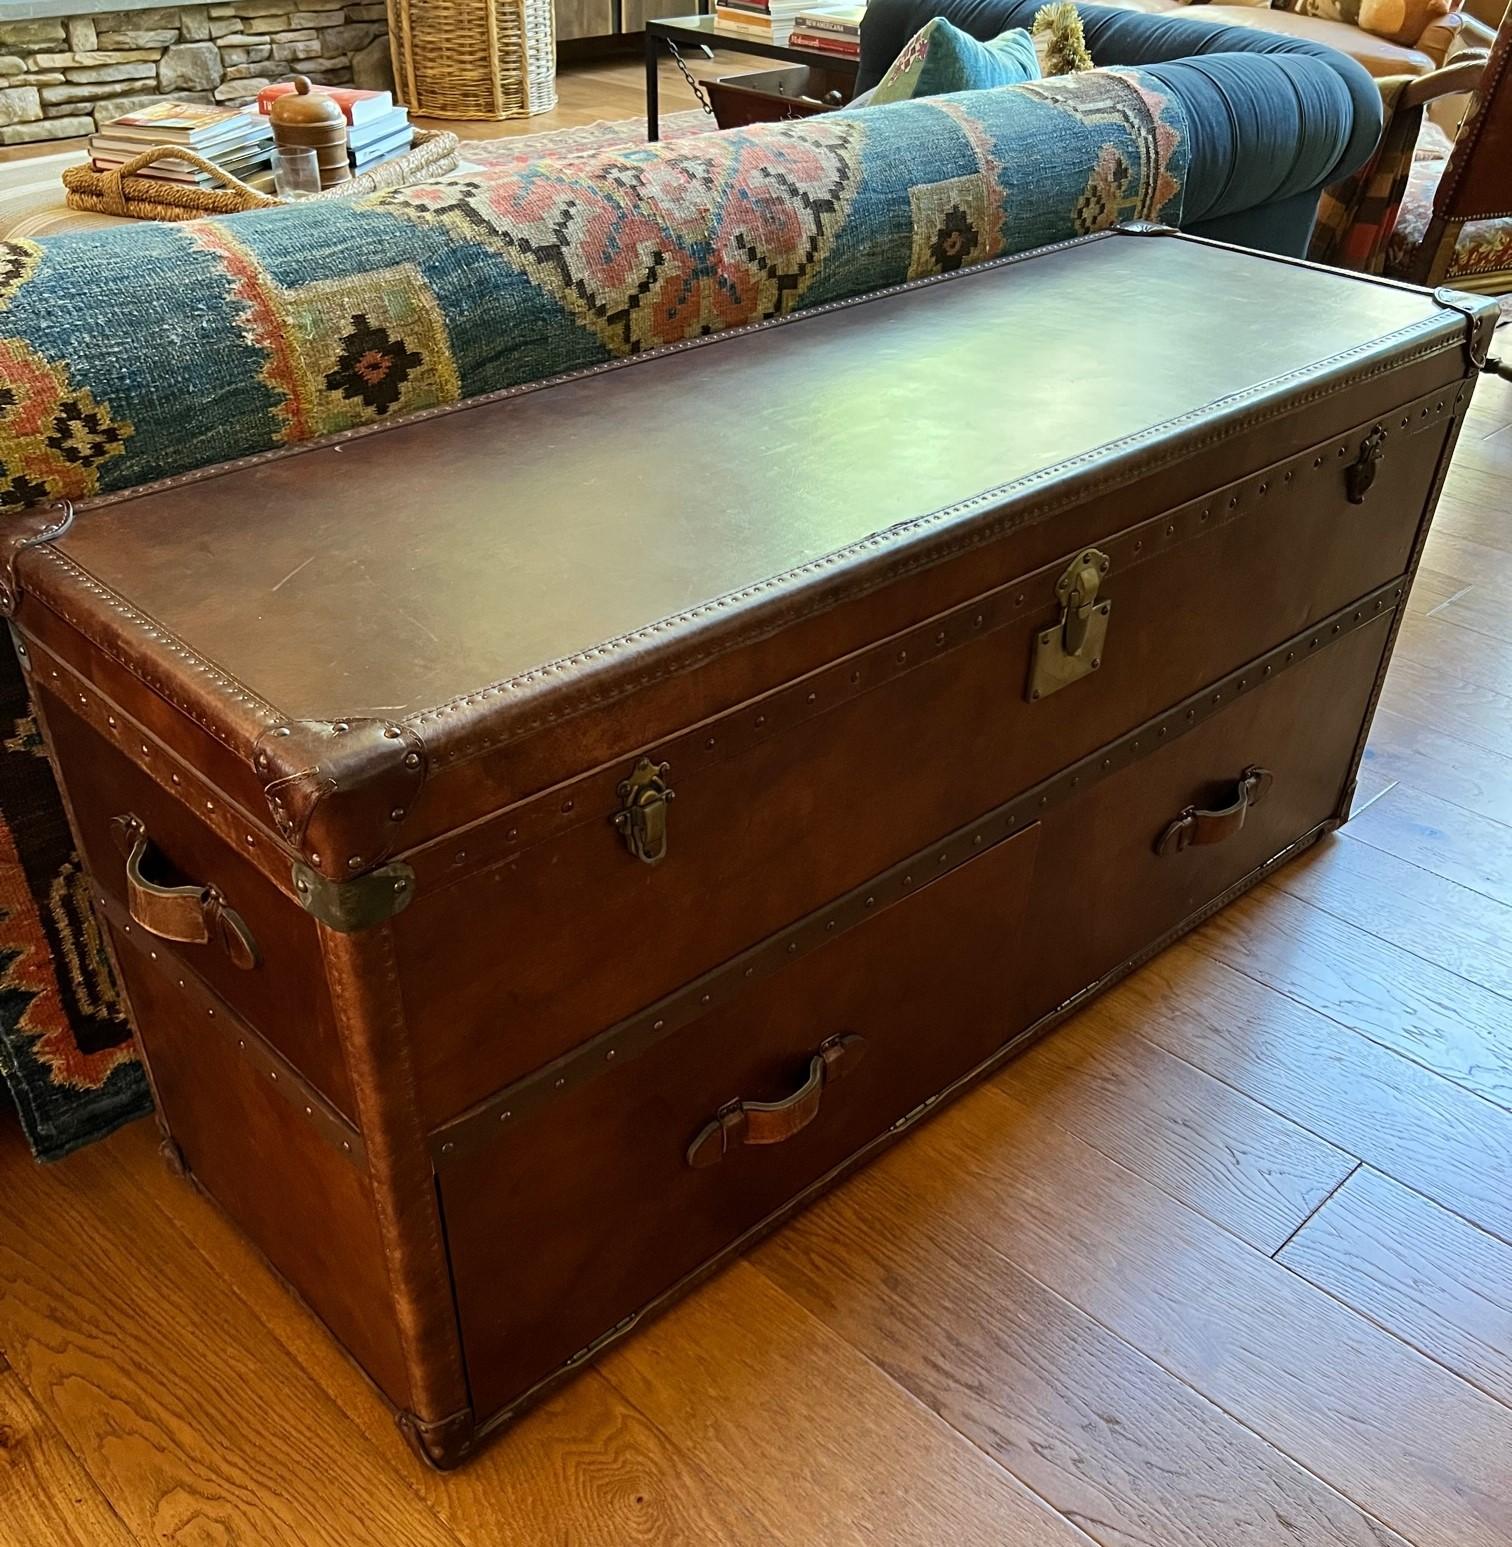 Created for Restoration Hardware by London antiques dealer Timothy Oulton, this media console is made of wood, covered with distressed leather and finished with thousands of hand-hammered nailheads. 

This reproduction antique steamer trunk is